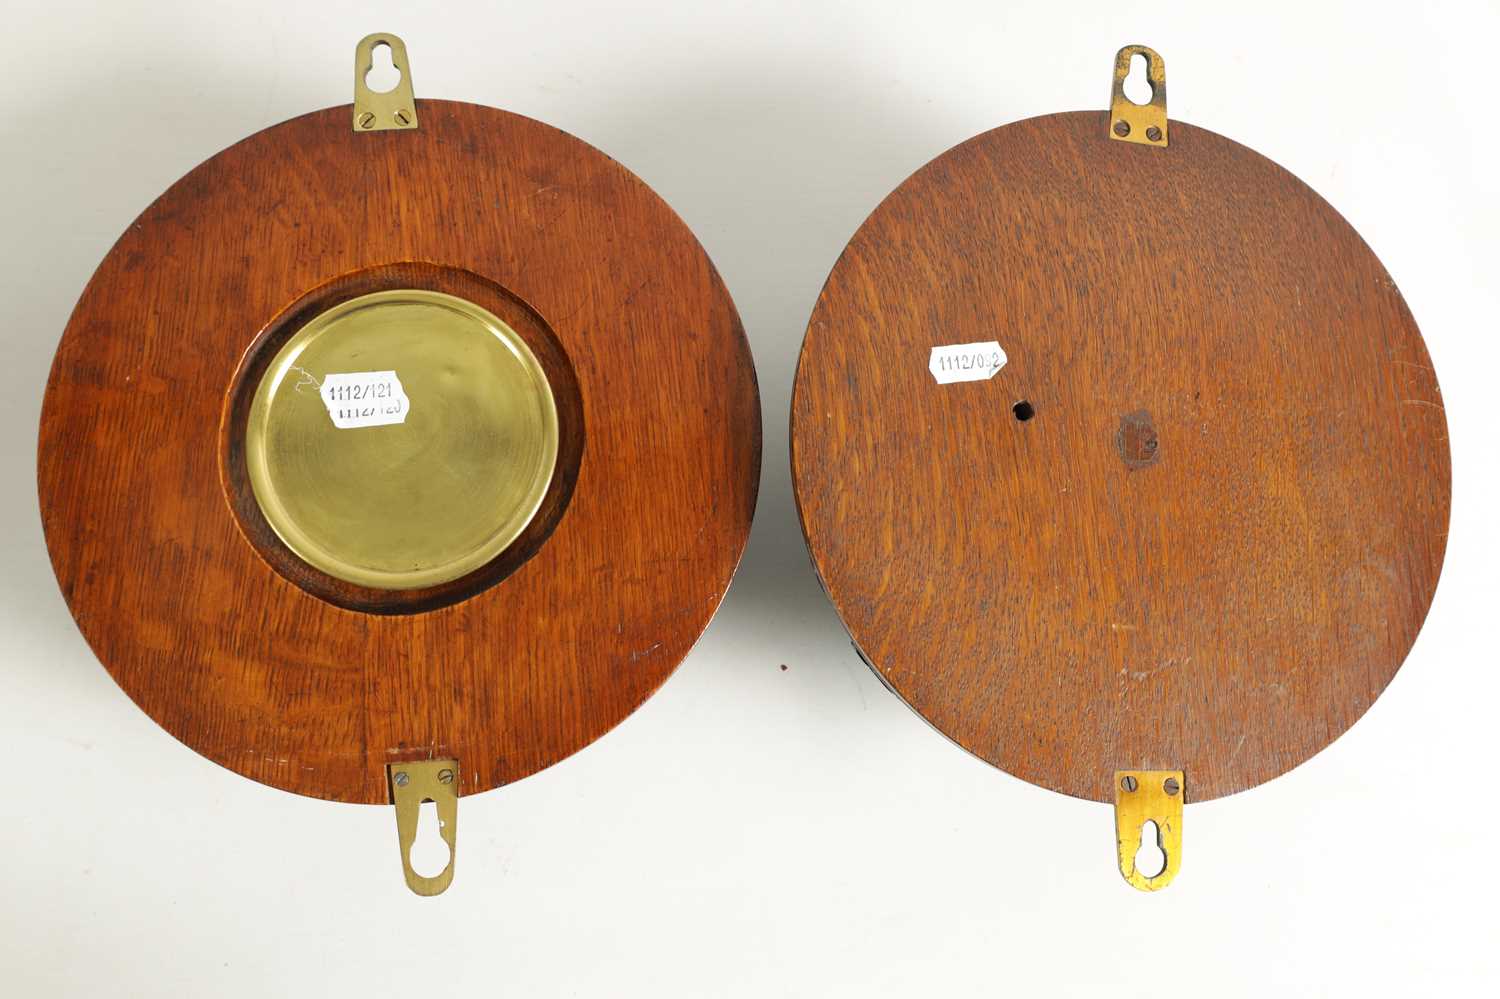 A PAIR OF LATE 19TH CENTURY WALL CLOCK AND BAROMETER SET - Image 7 of 7